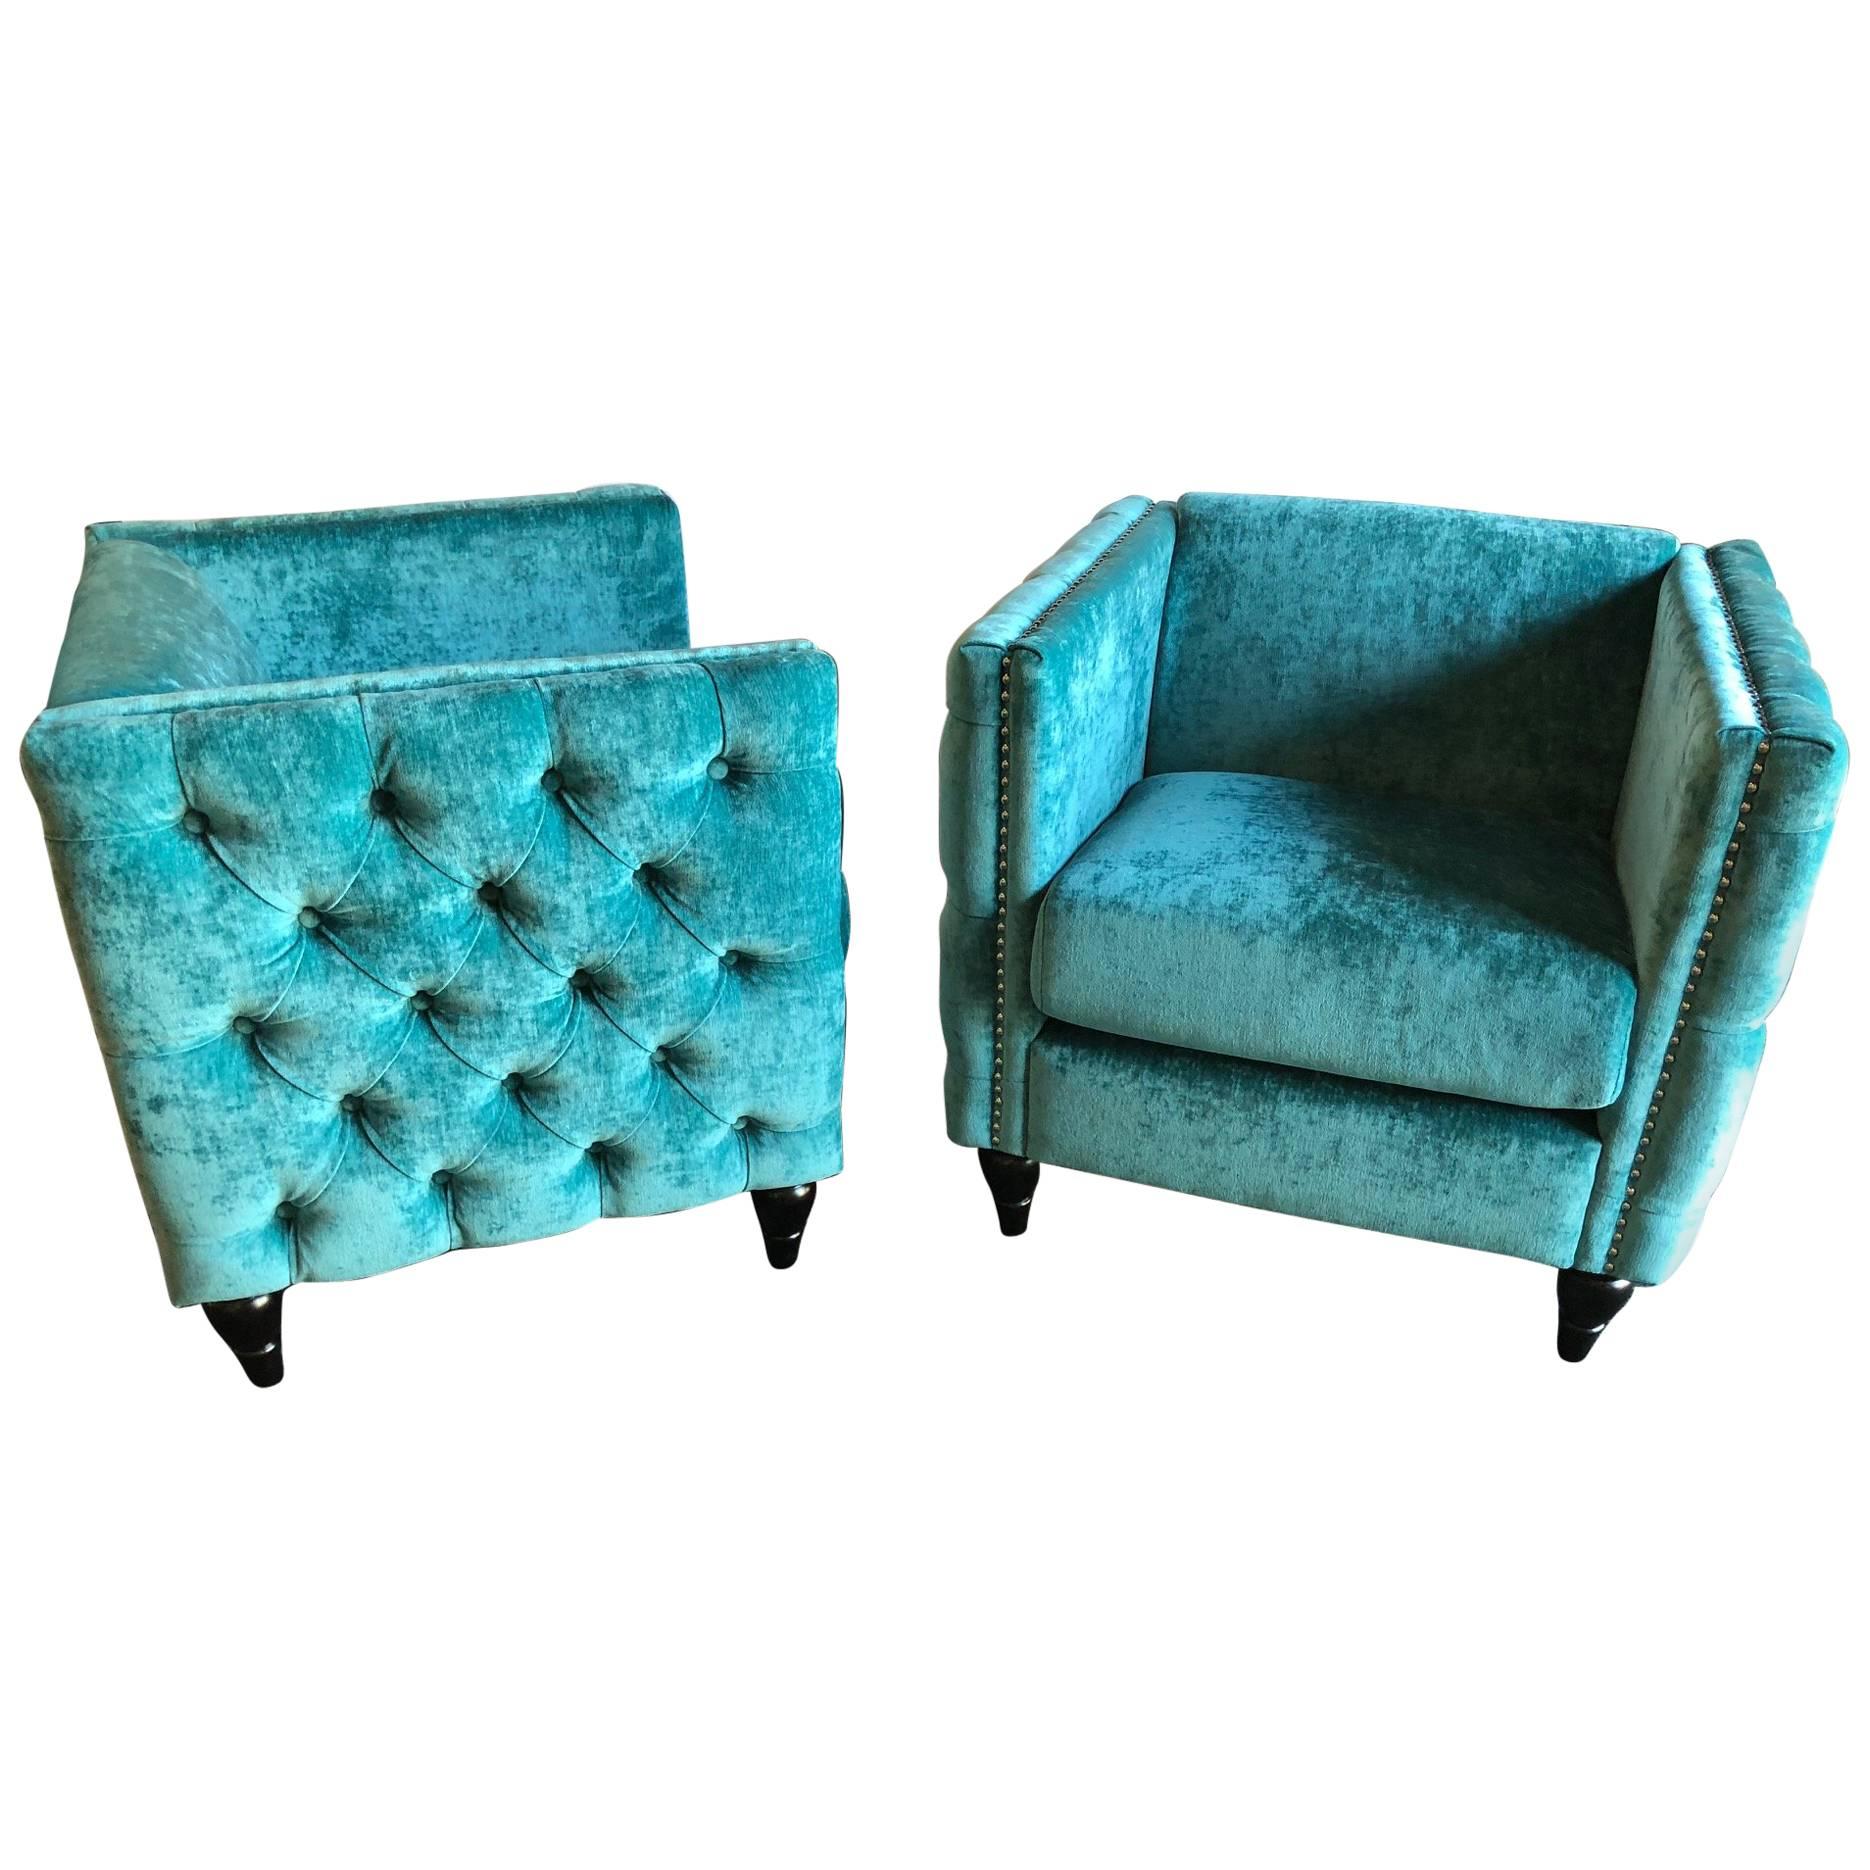 Pair of Mid-Century Modern Style Teal Tufted Oversized Box Form Armchairs